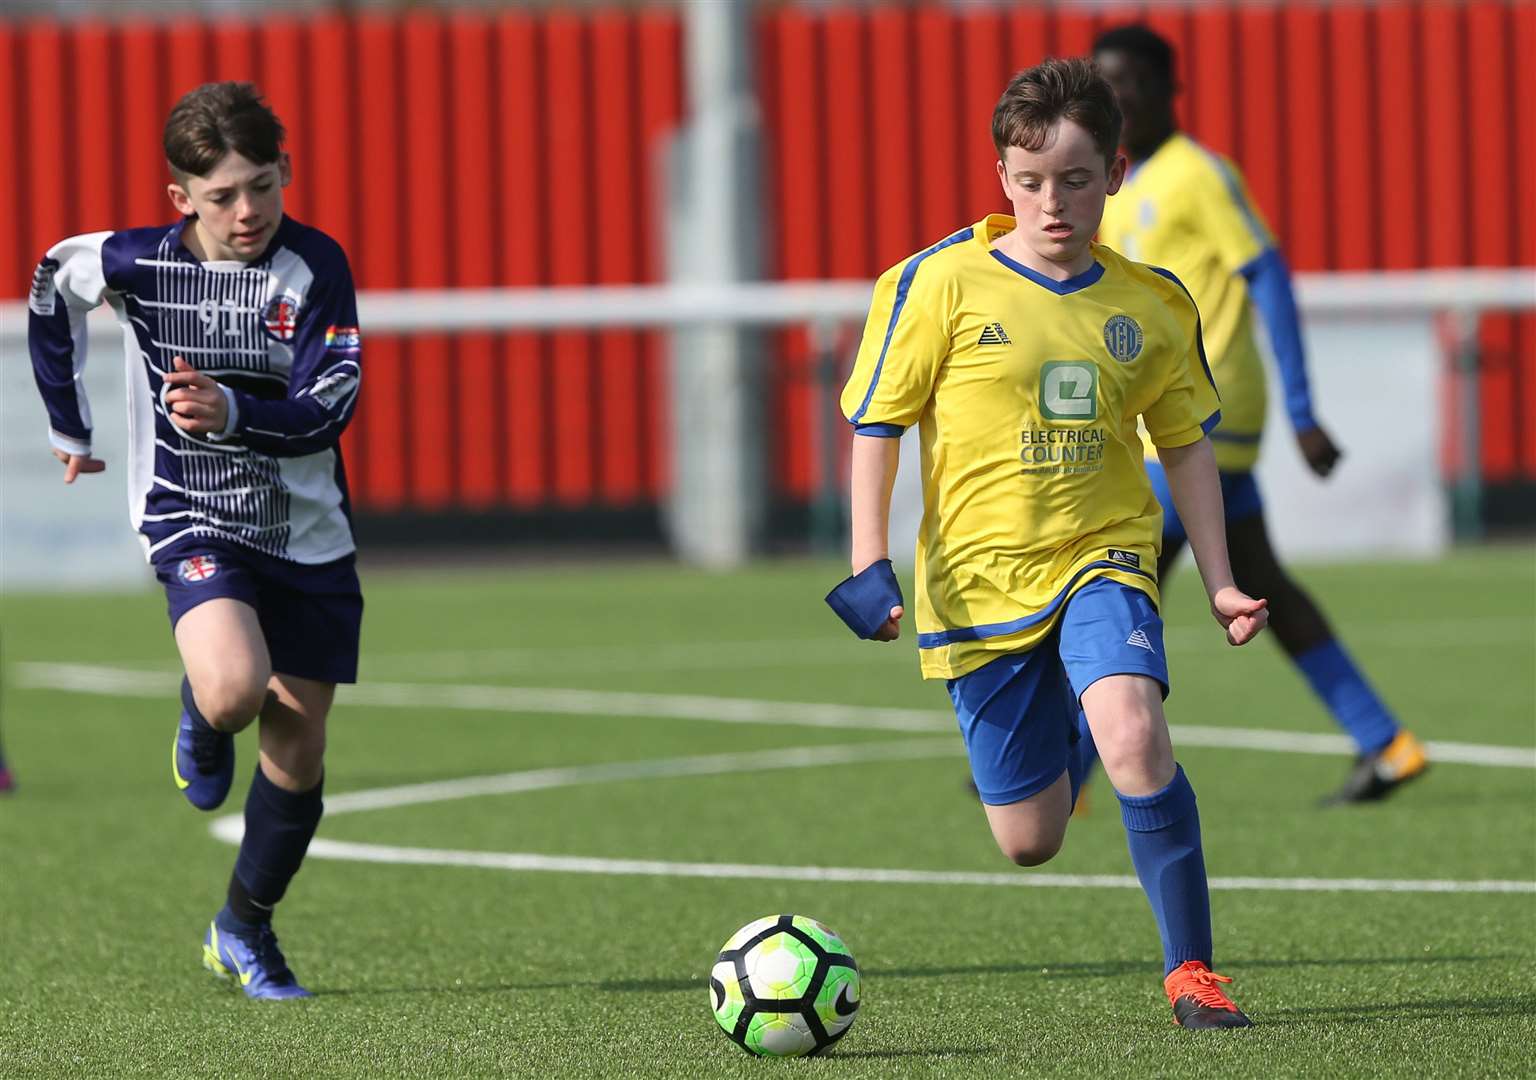 There were five goals shared between Danson Sports under-13s and Total Football Development under-13s (yellow). Picture: PSP Images (55560611)